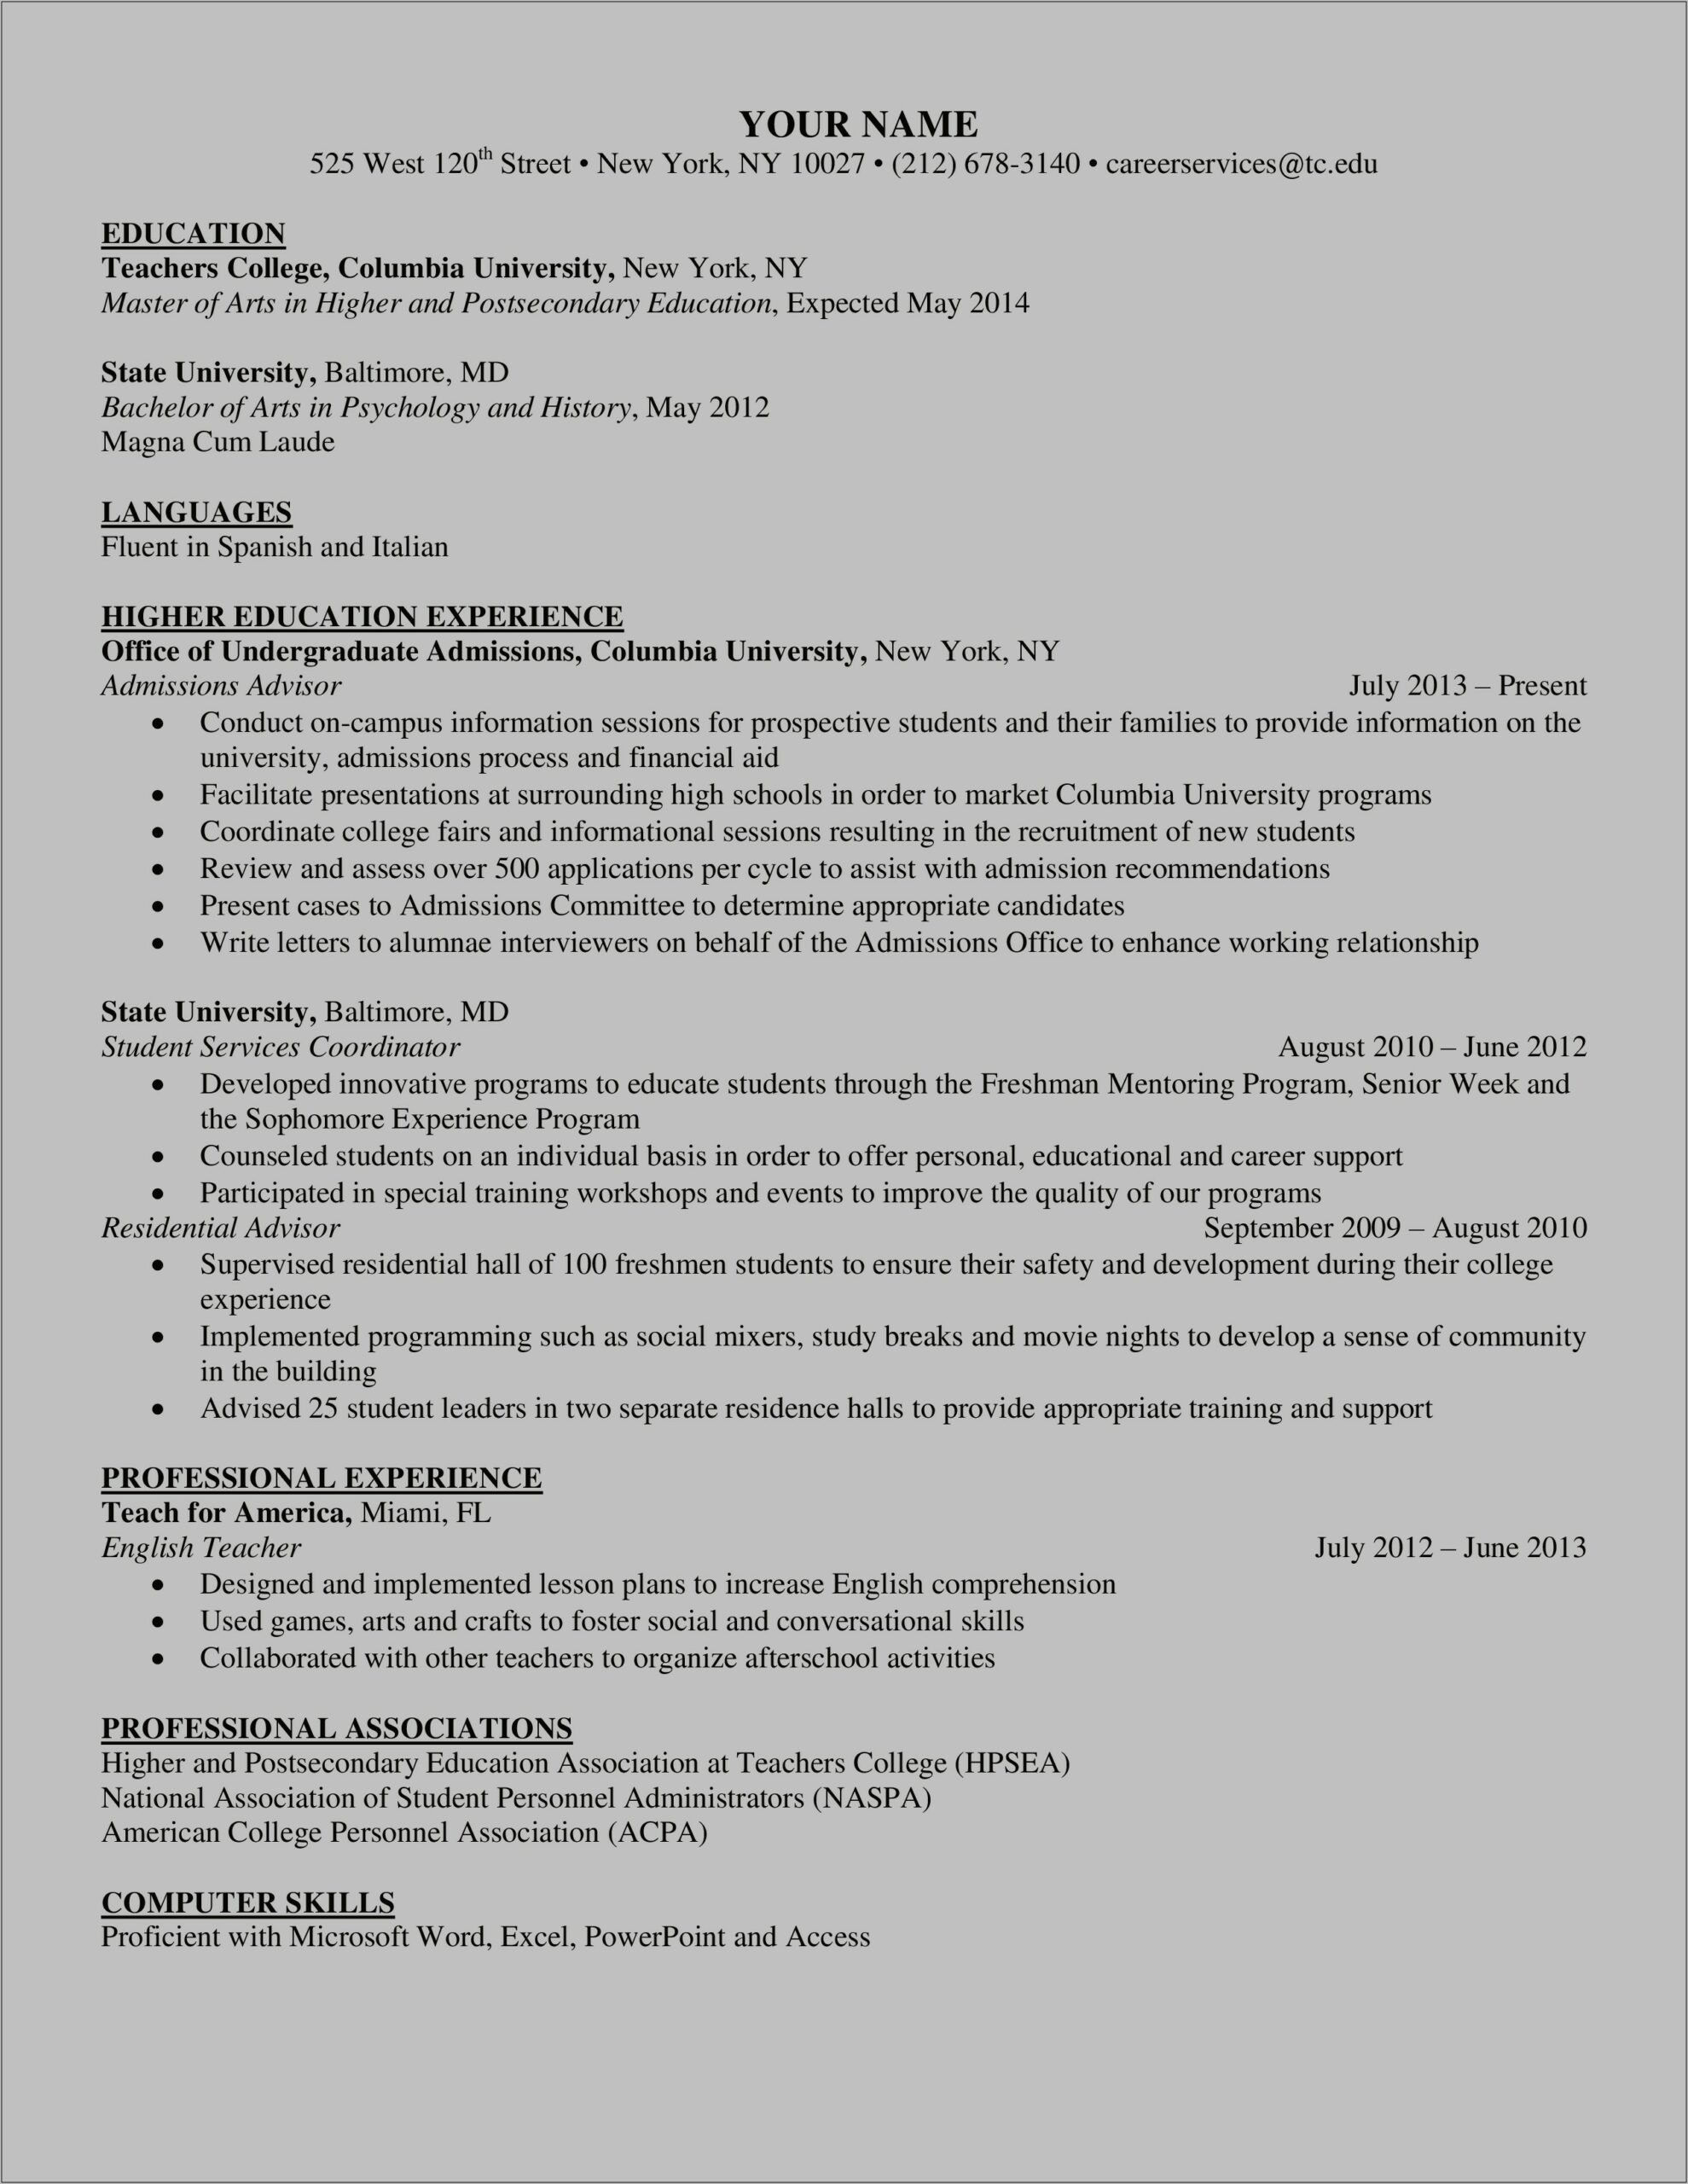 Examples Of Resumes For Higher Education